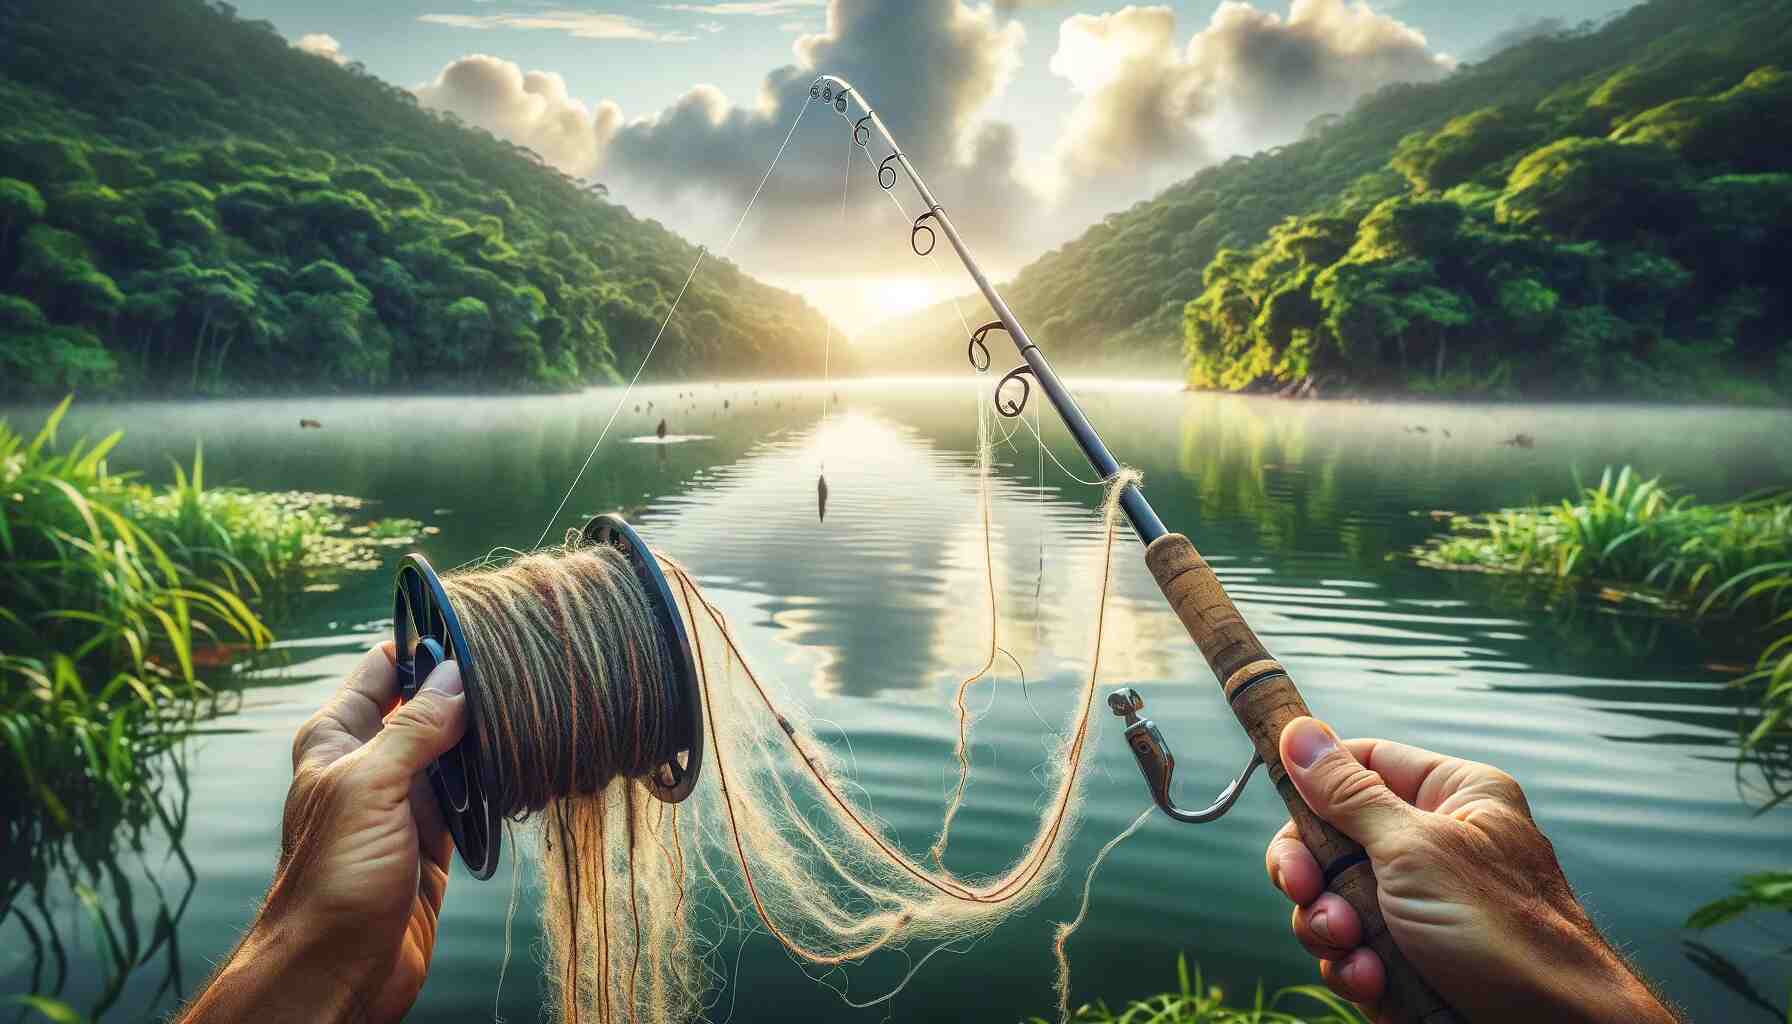 Here is the featured image for Does Fishing Line Go Bad? It depicts a serene fishing scene with a focus on an aged and frayed fishing line, set against a backdrop of a calm lake and lush greenery in the early morning.